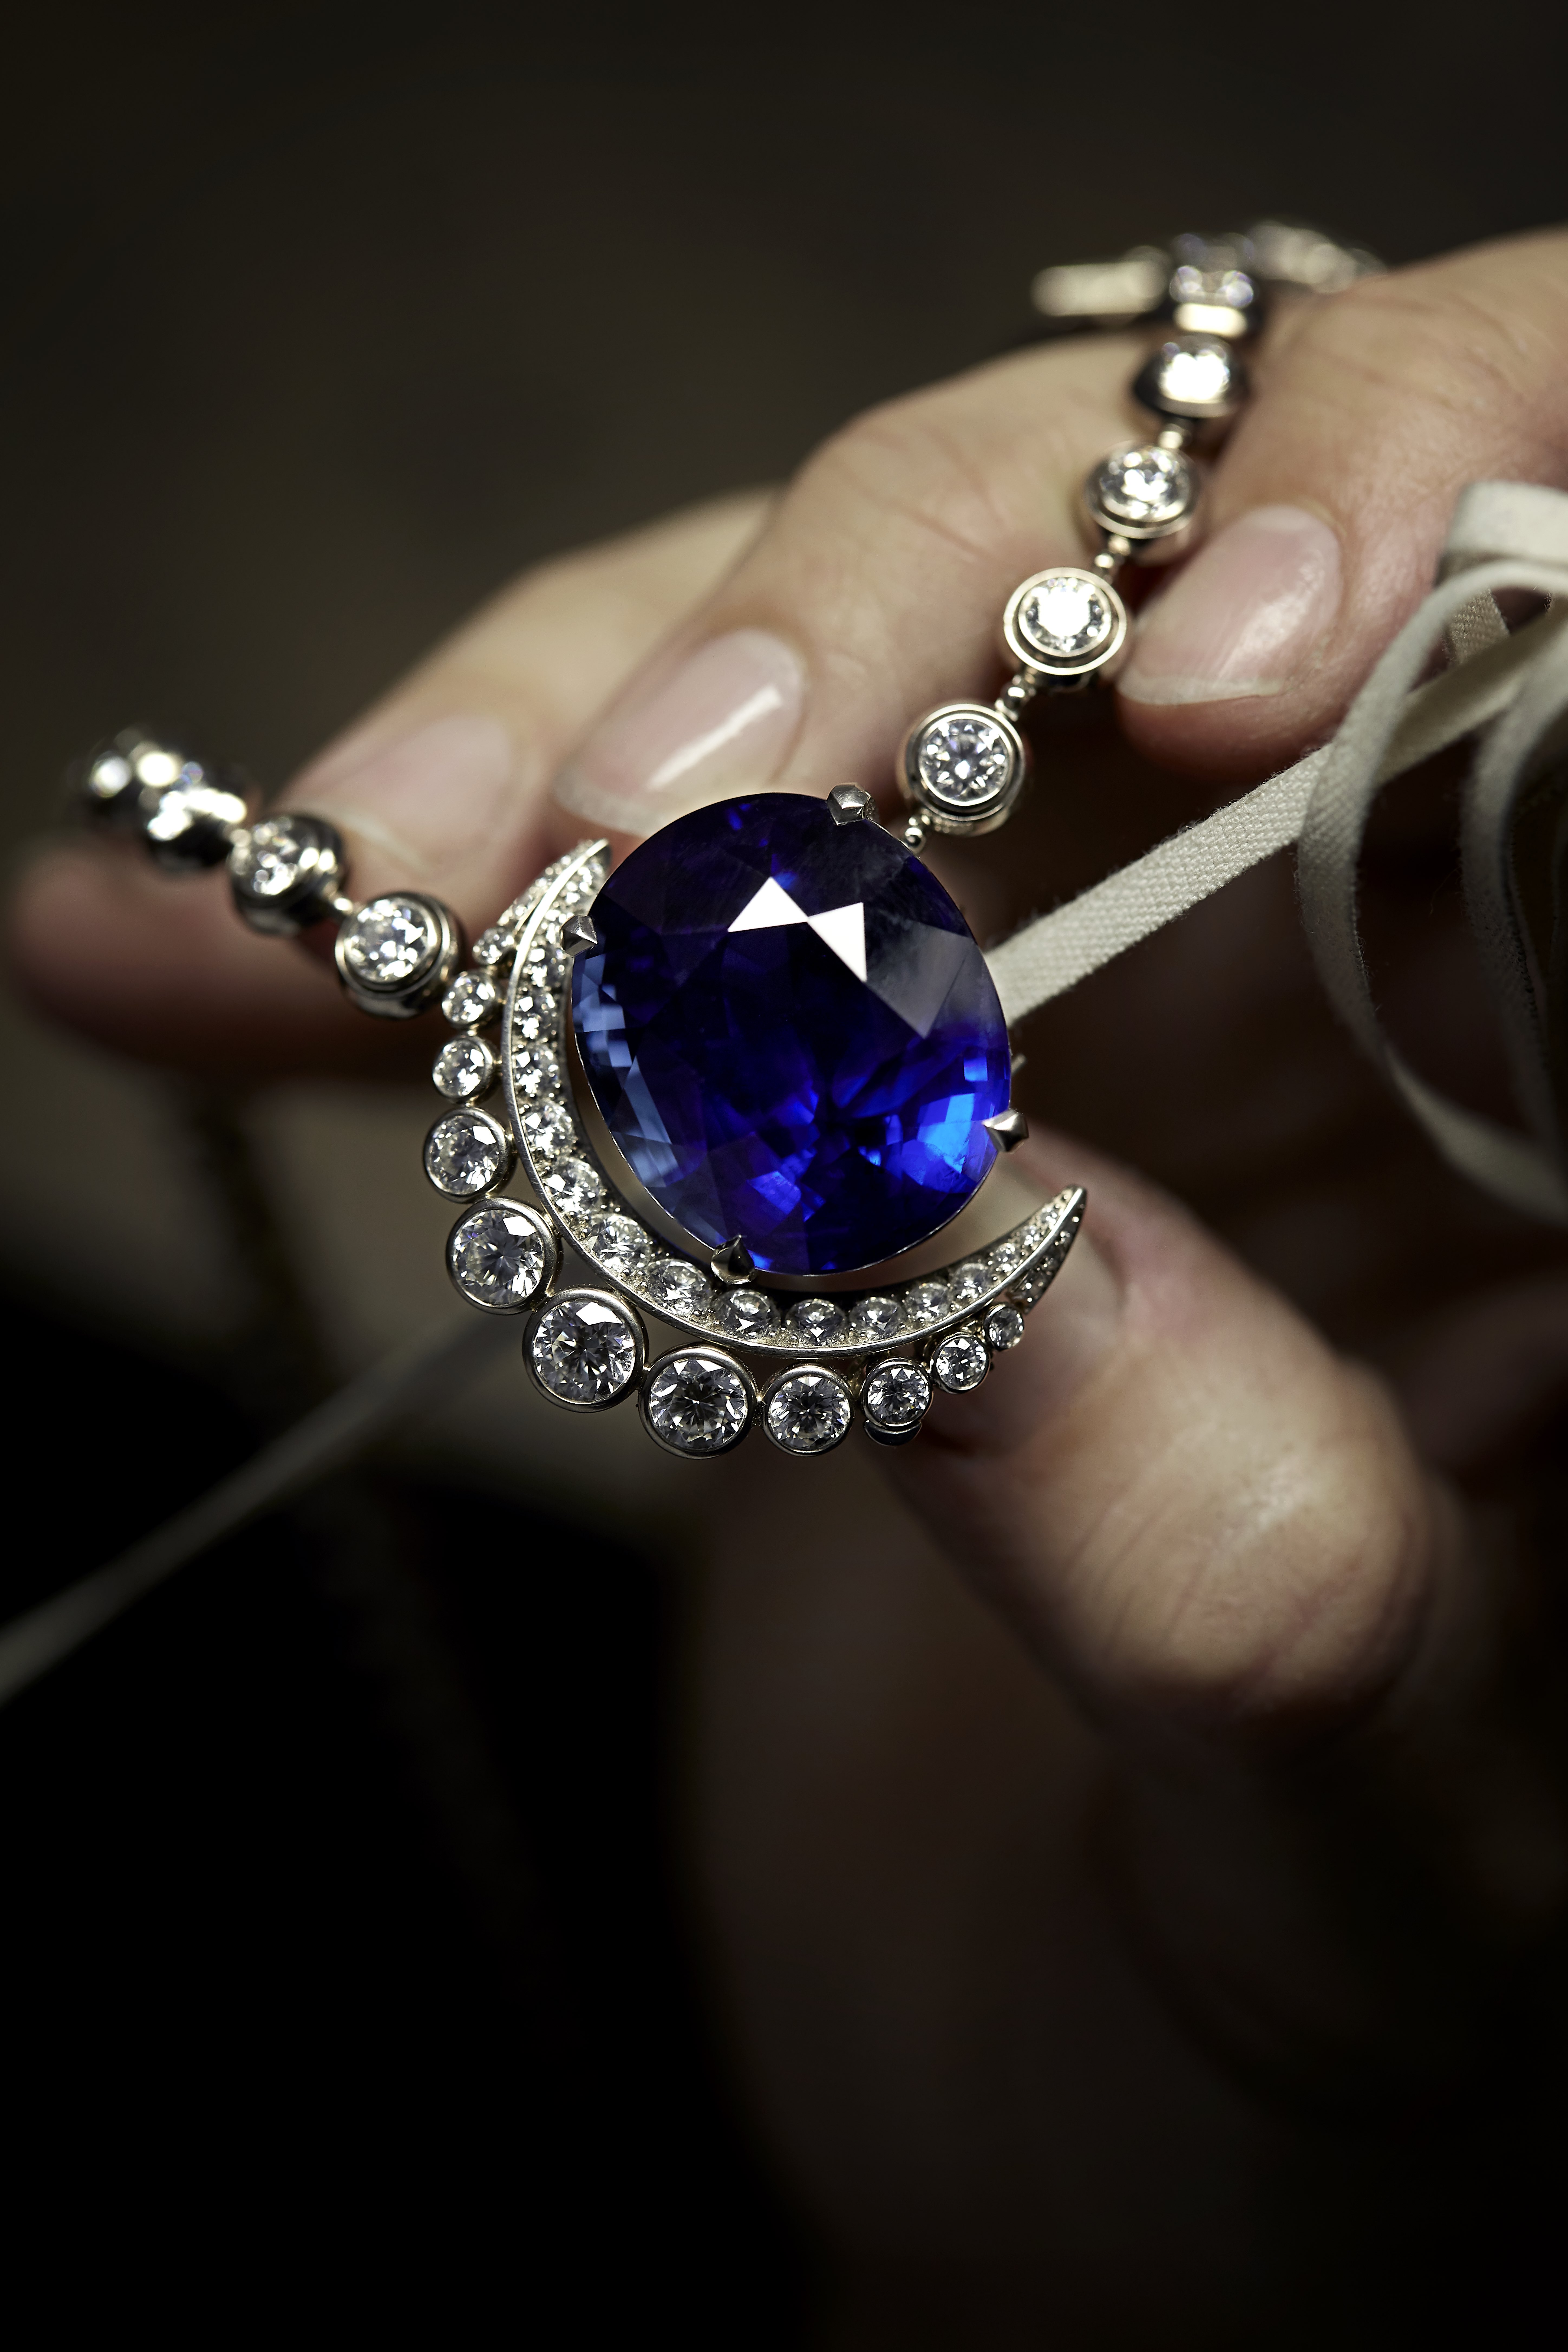 Chanel unveils necklace from new high jewellery “1932” collection